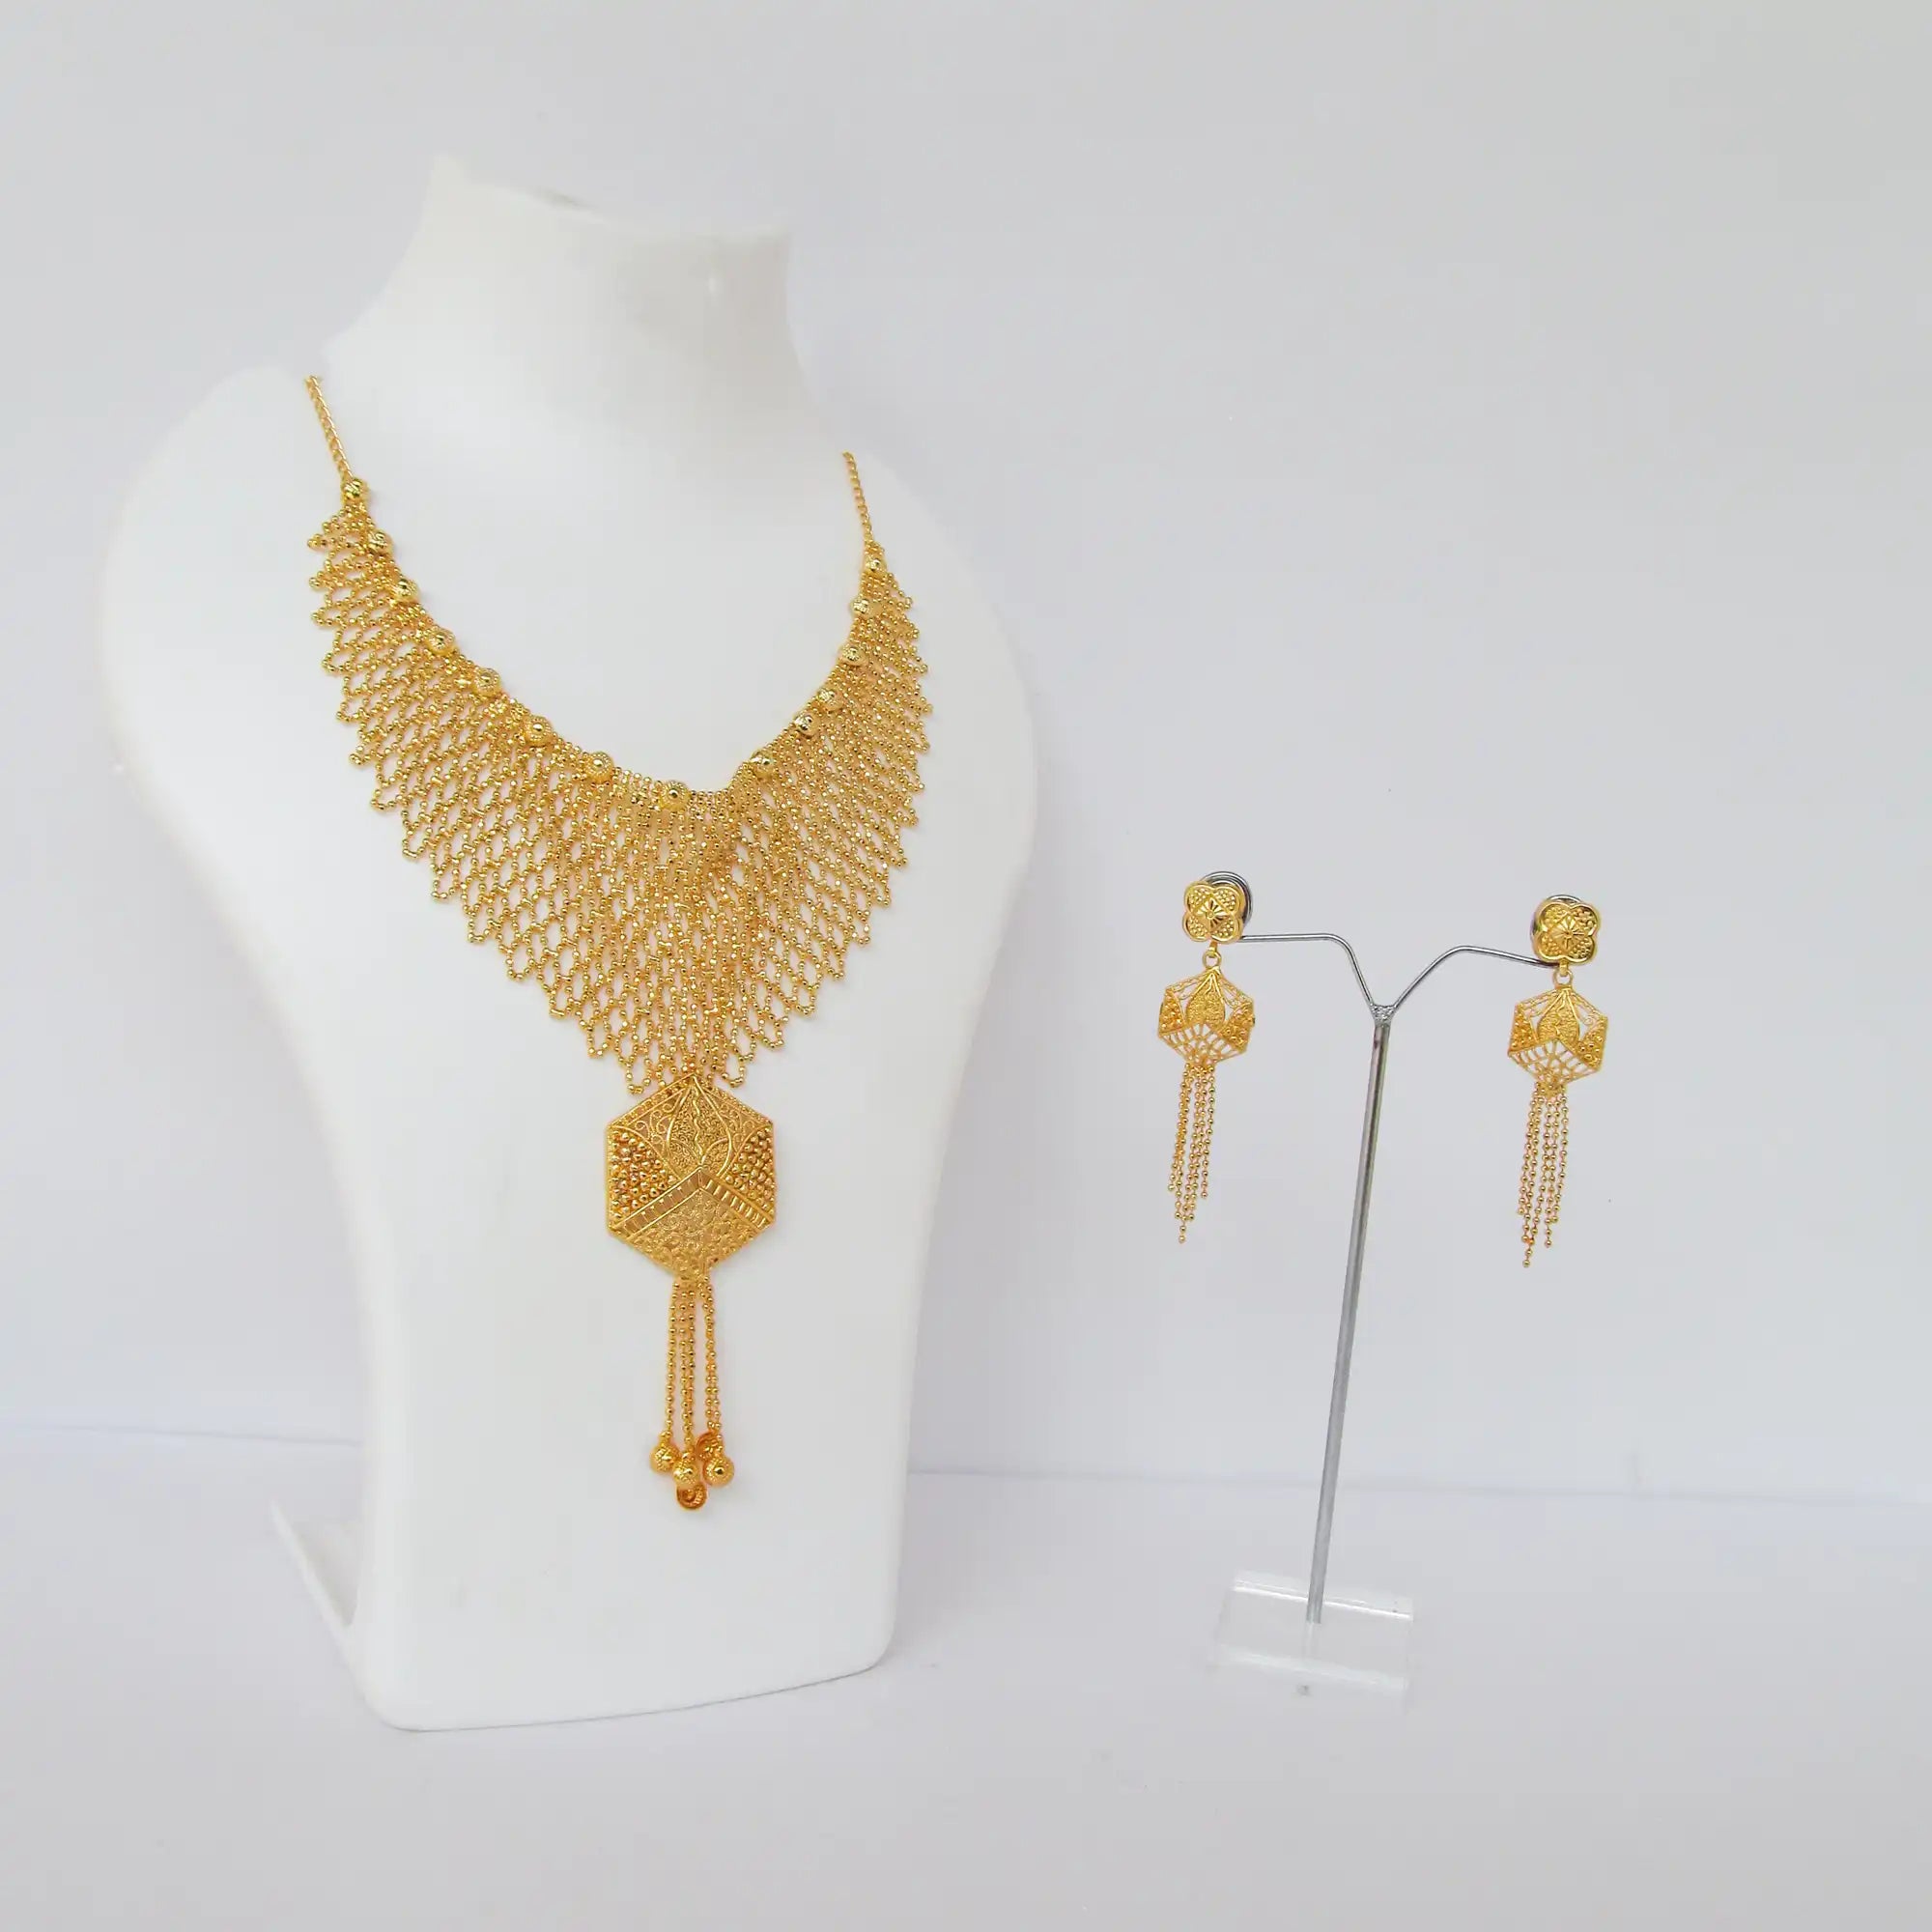 Earrings and Necklace Set NS 04